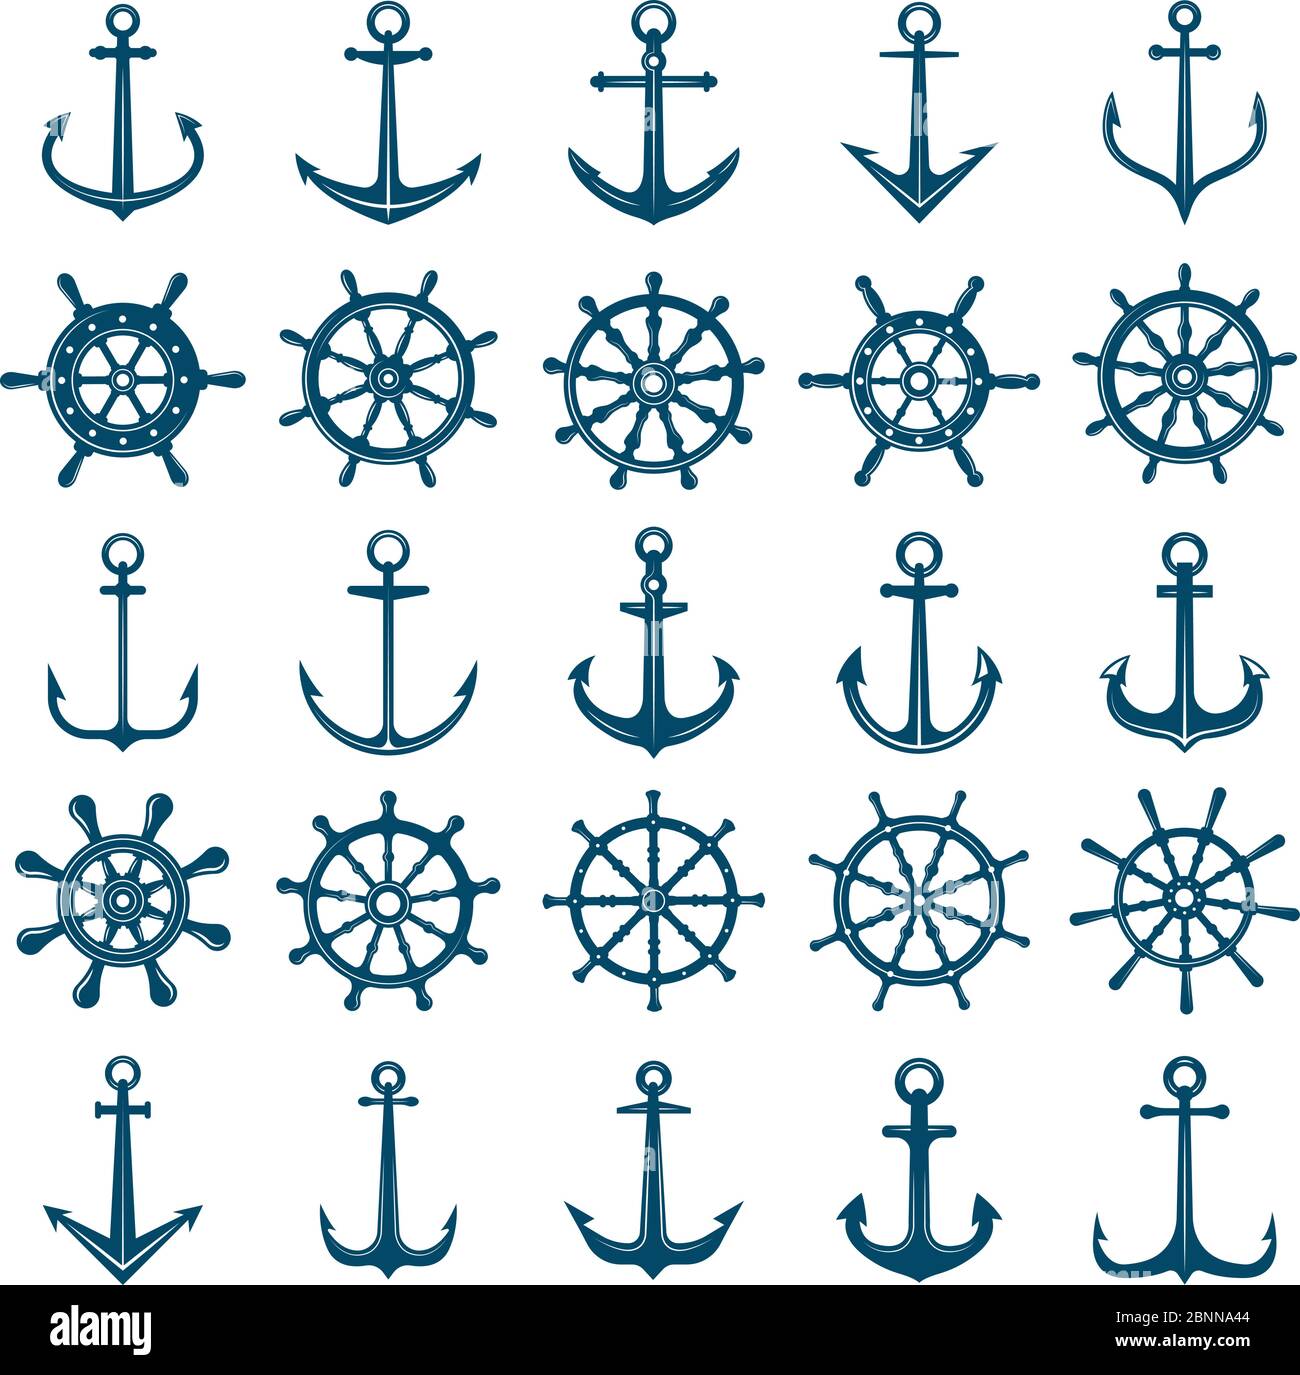 Wheels ship anchors icon. Steering wheels boat and ship anchors marine and navy symbols. Vector silhouettes for logo designs or tattoo Stock Vector